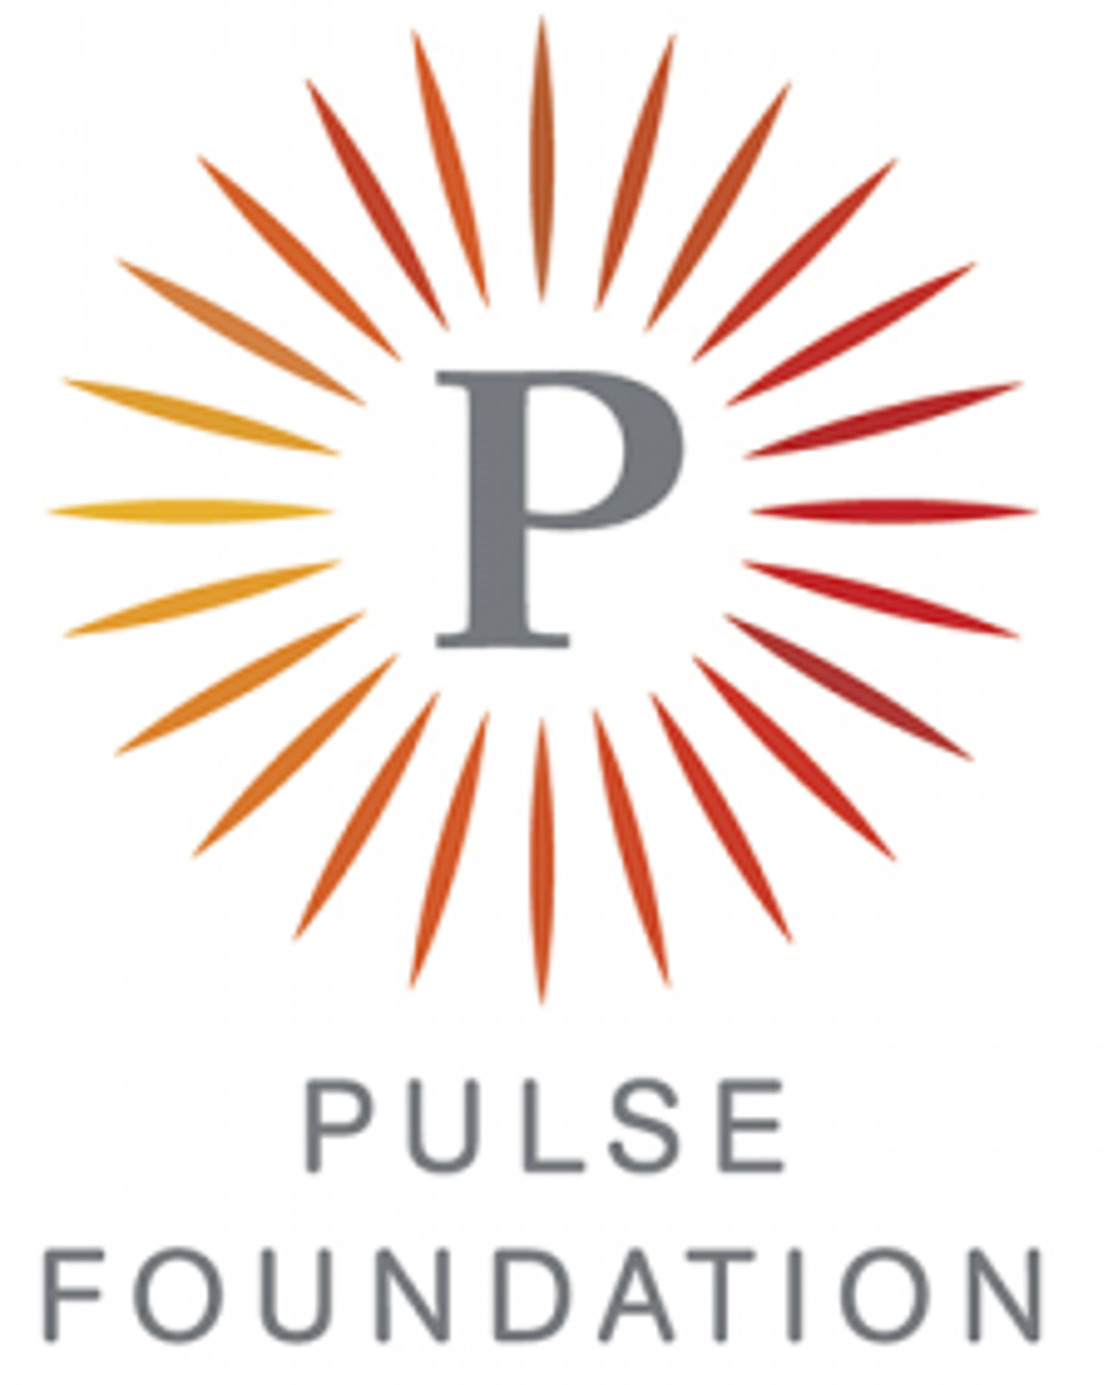 The Pulse Foundation and the Degroof Petercam Foundation join forces to launch an innovative programme to help bankrupt entrepreneurs.